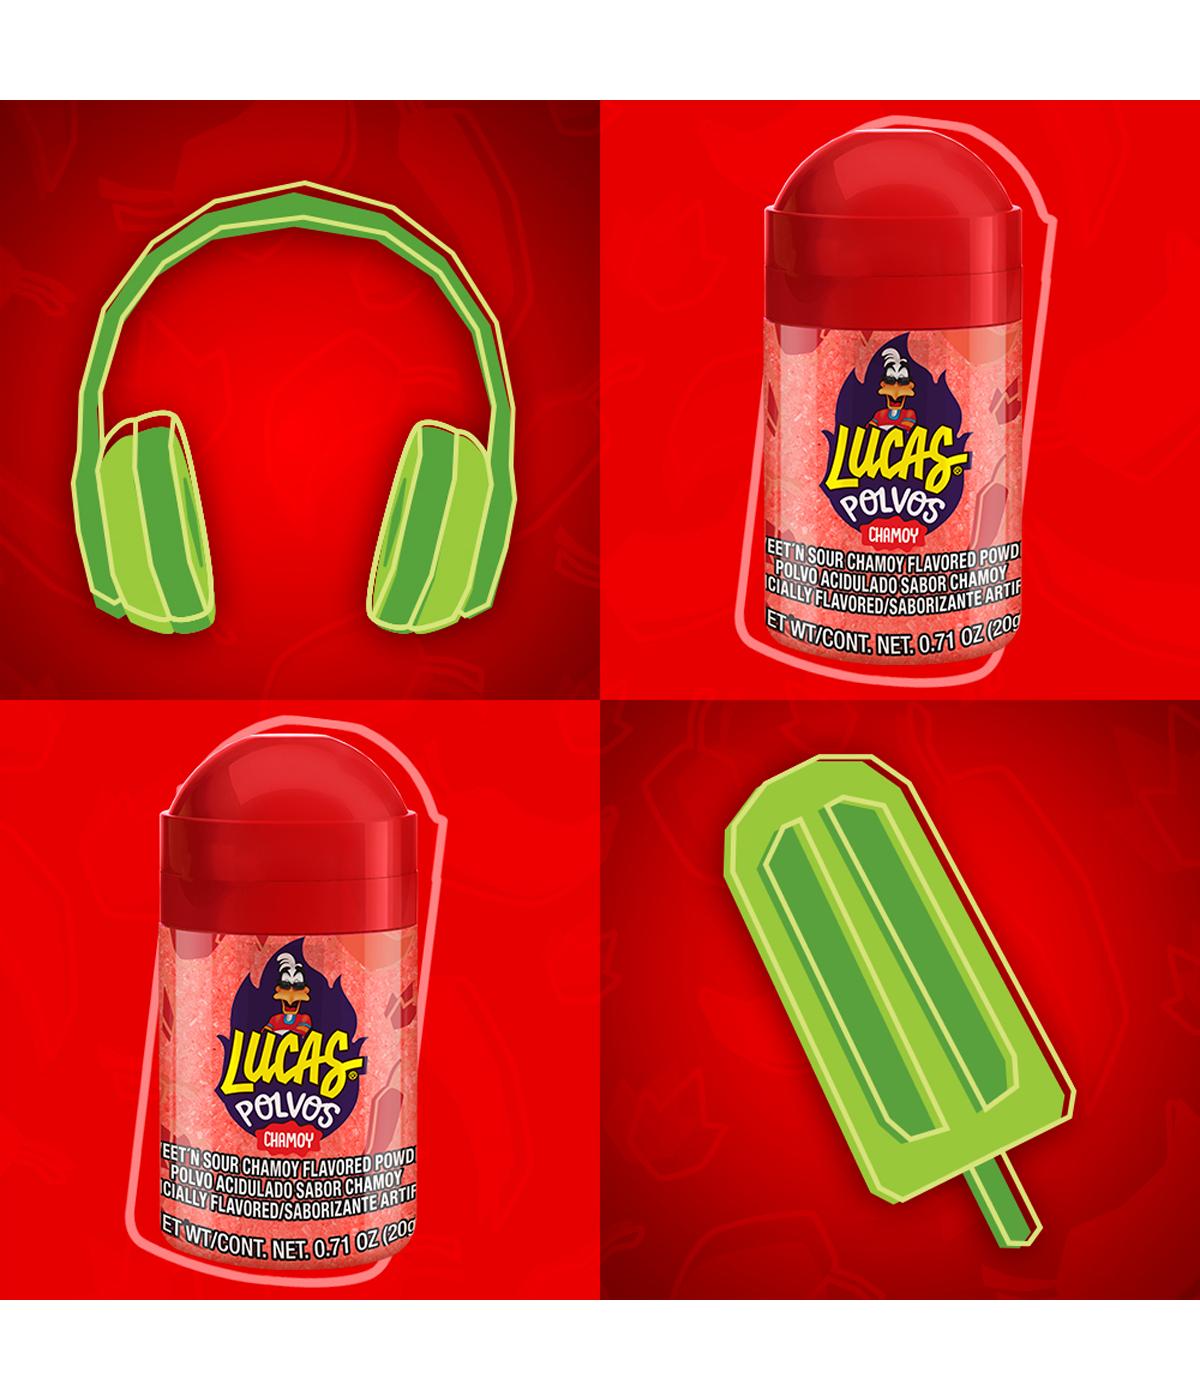 Lucas Polvos Chamoy Powder Candy; image 2 of 3